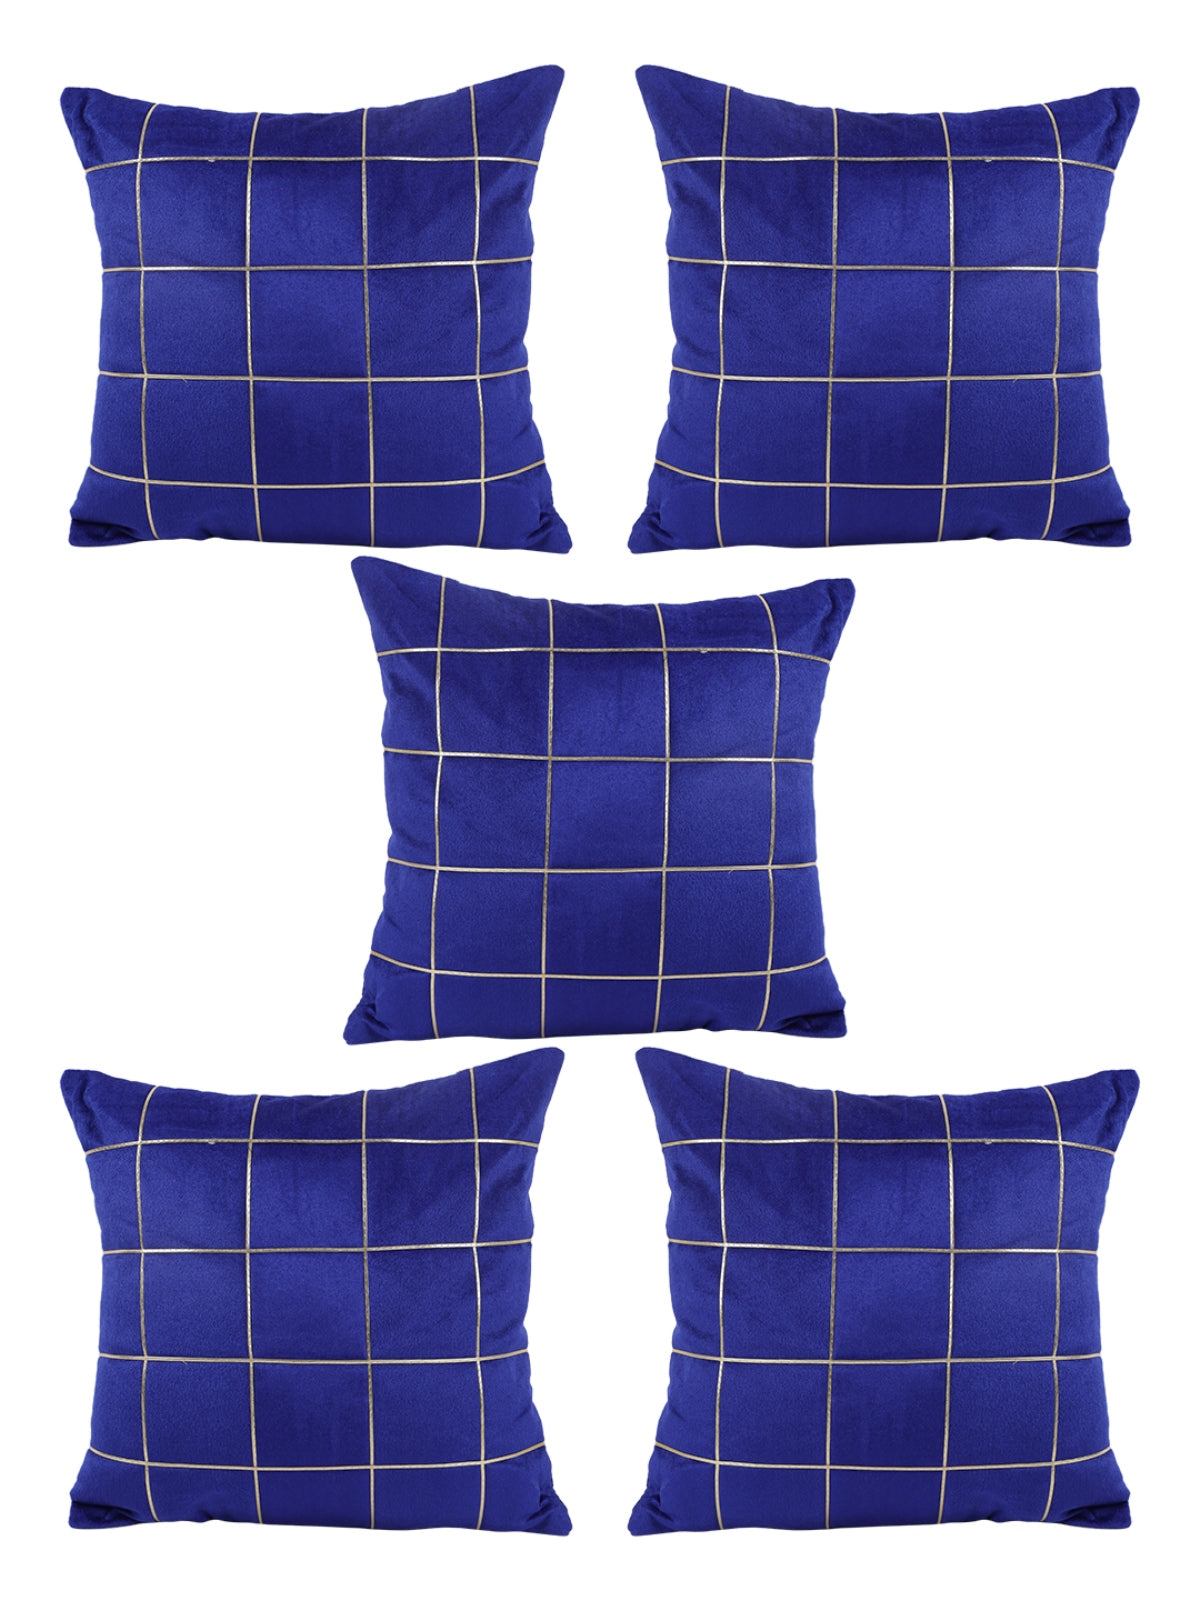 Royal Blue Set of 5 Polyester 16 Inch x 16 Inch Cushion Covers